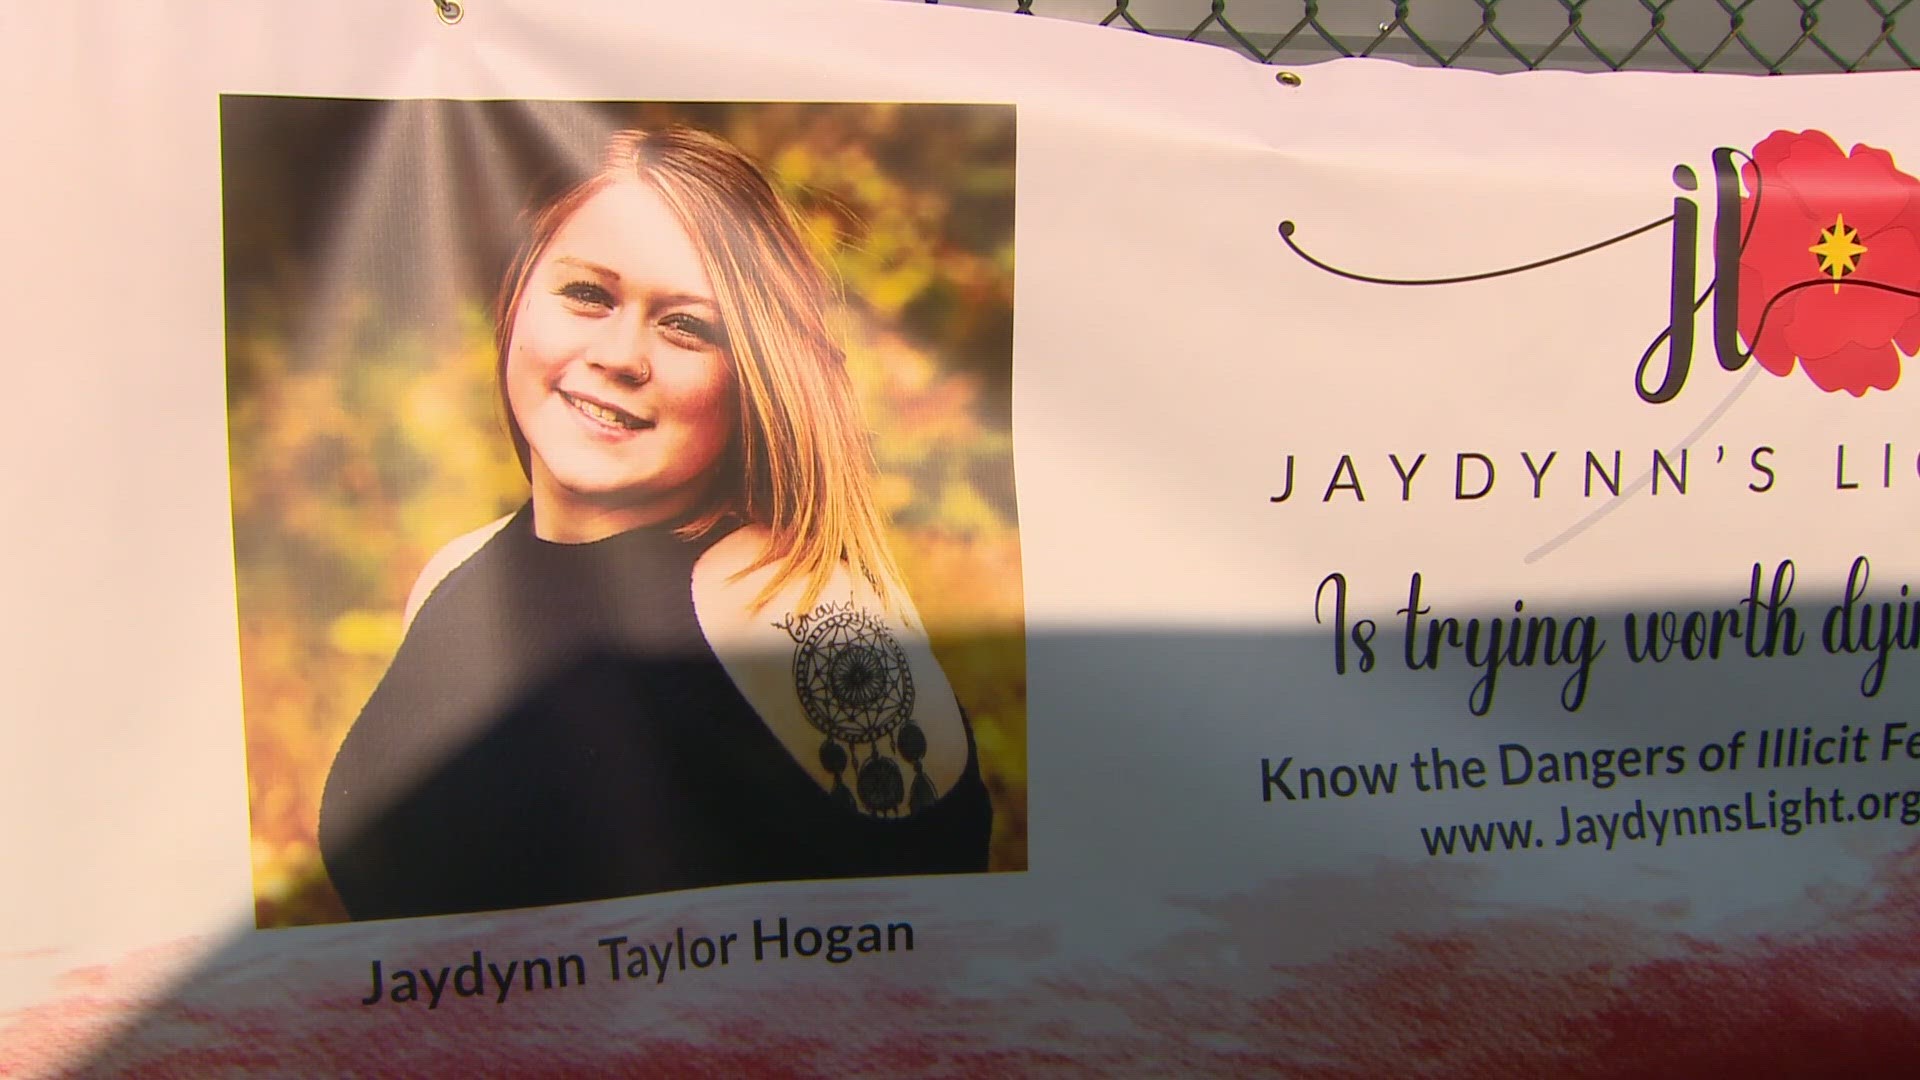 16-year-old Jaydynn Hogan died in July 2021 after accidentally taking a pill laced with fentanyl.